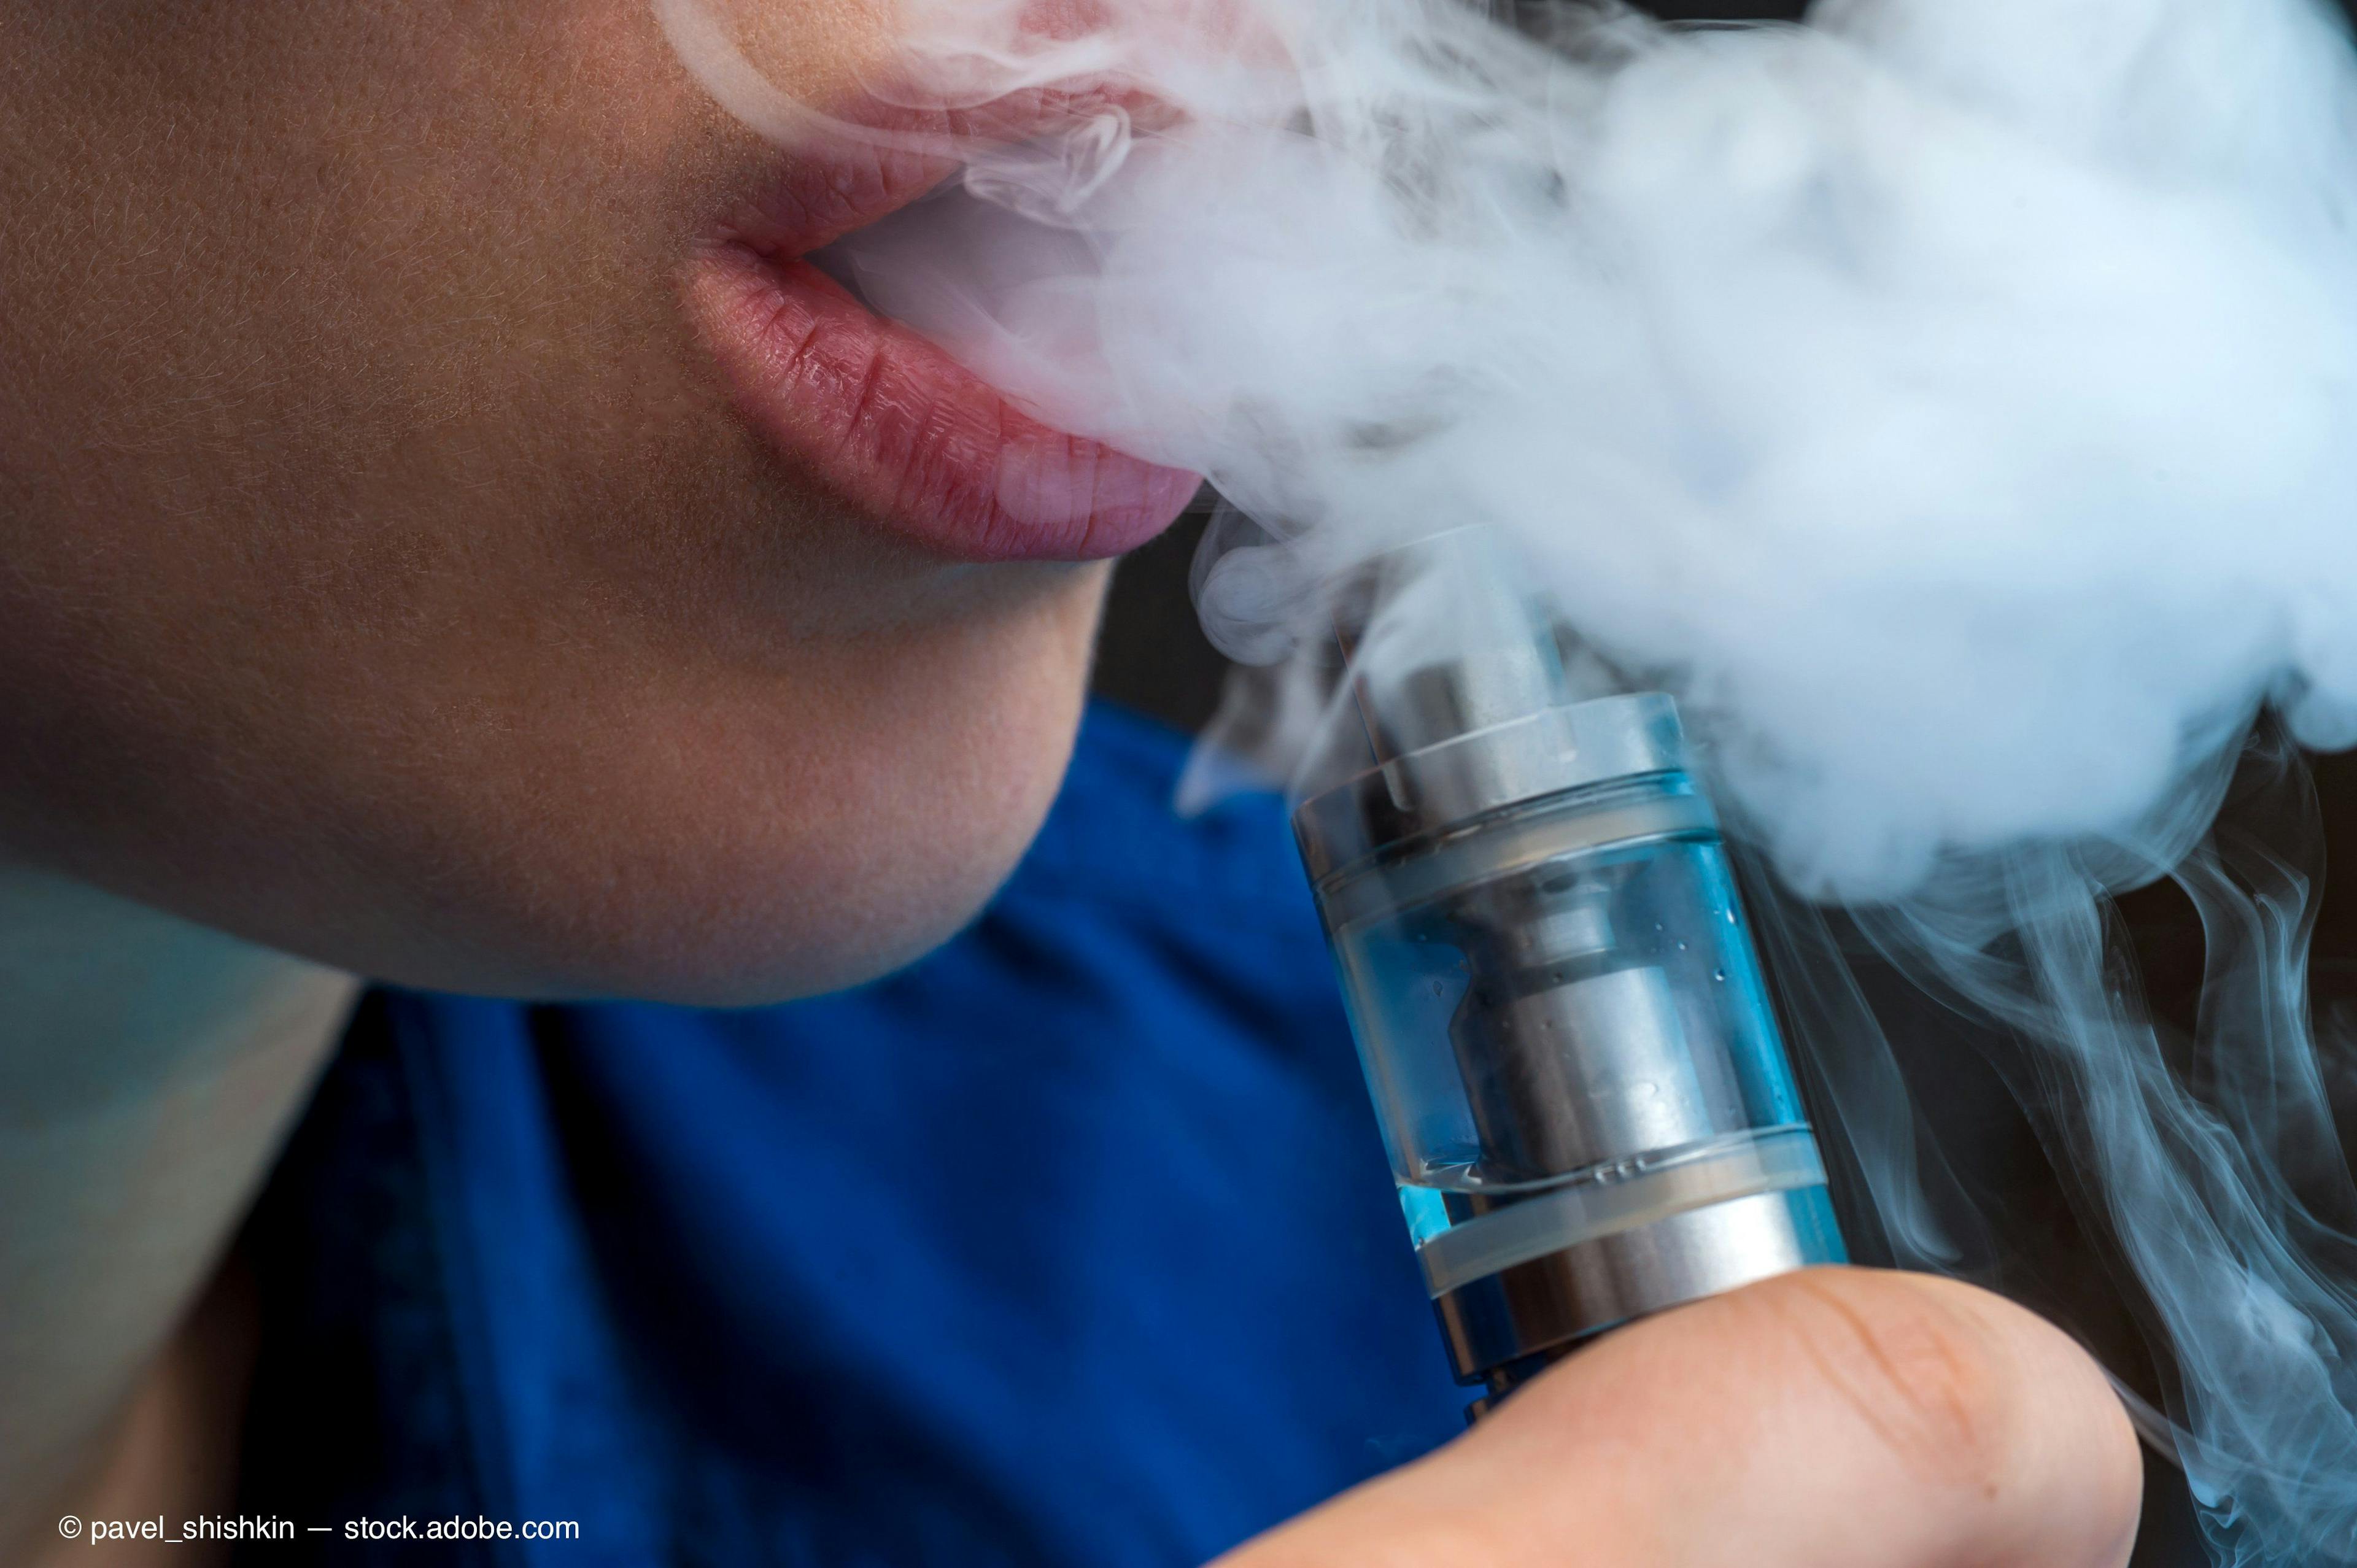 Biomarkers of Carcinogens Linked to Bladder Cancer in Urine of E-Cigarette Users